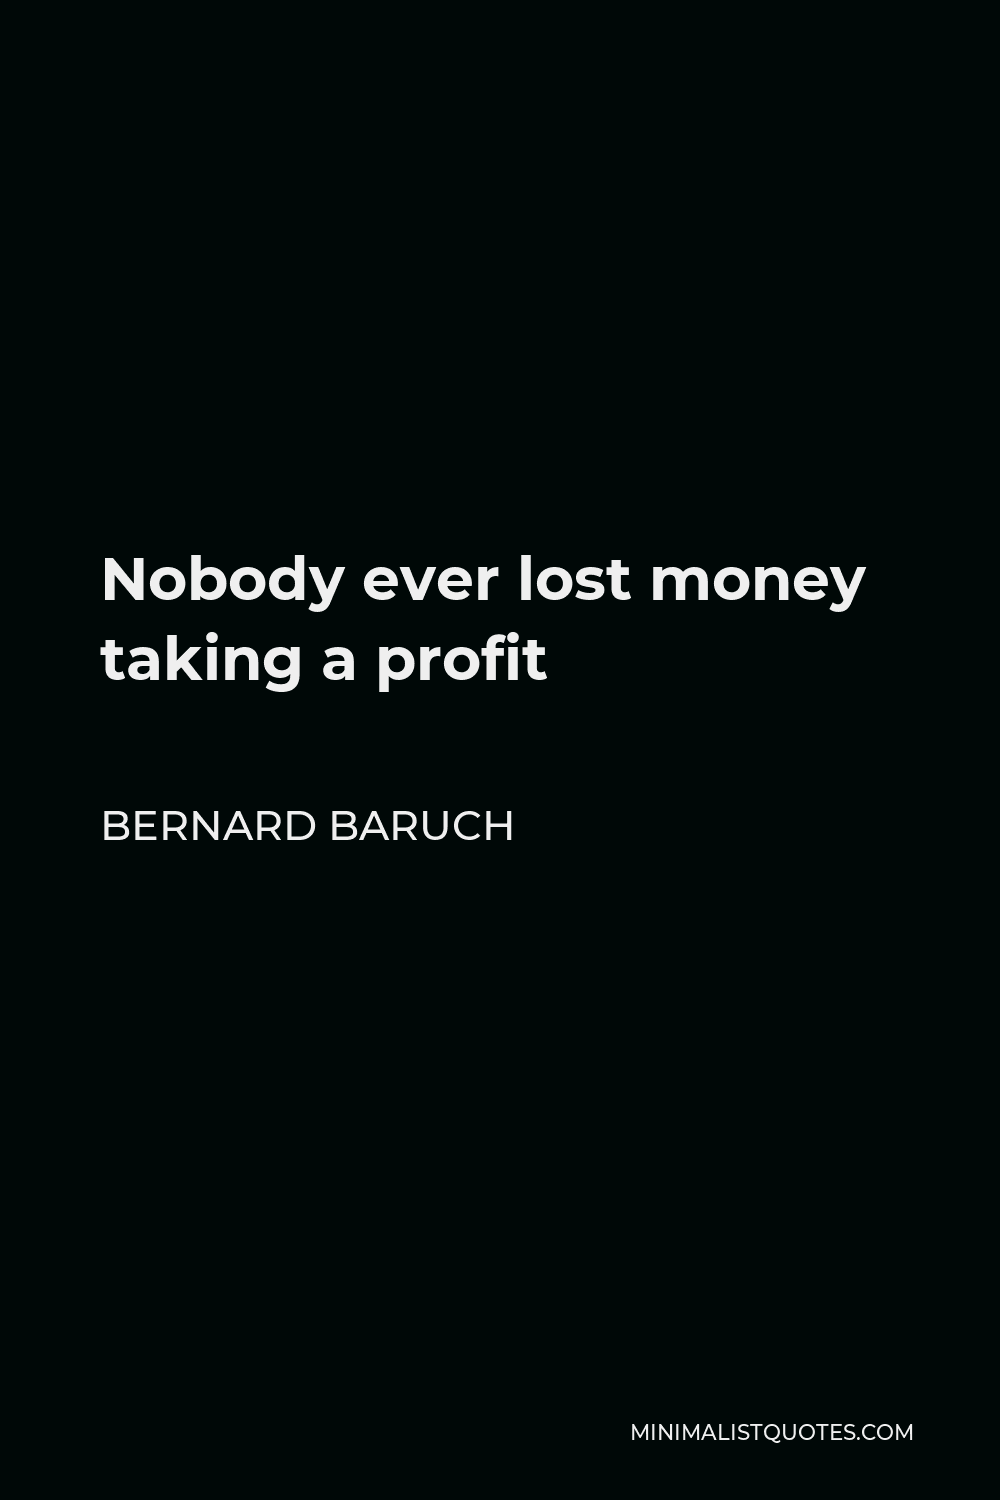 Bernard Baruch Quote - Nobody ever lost money taking a profit